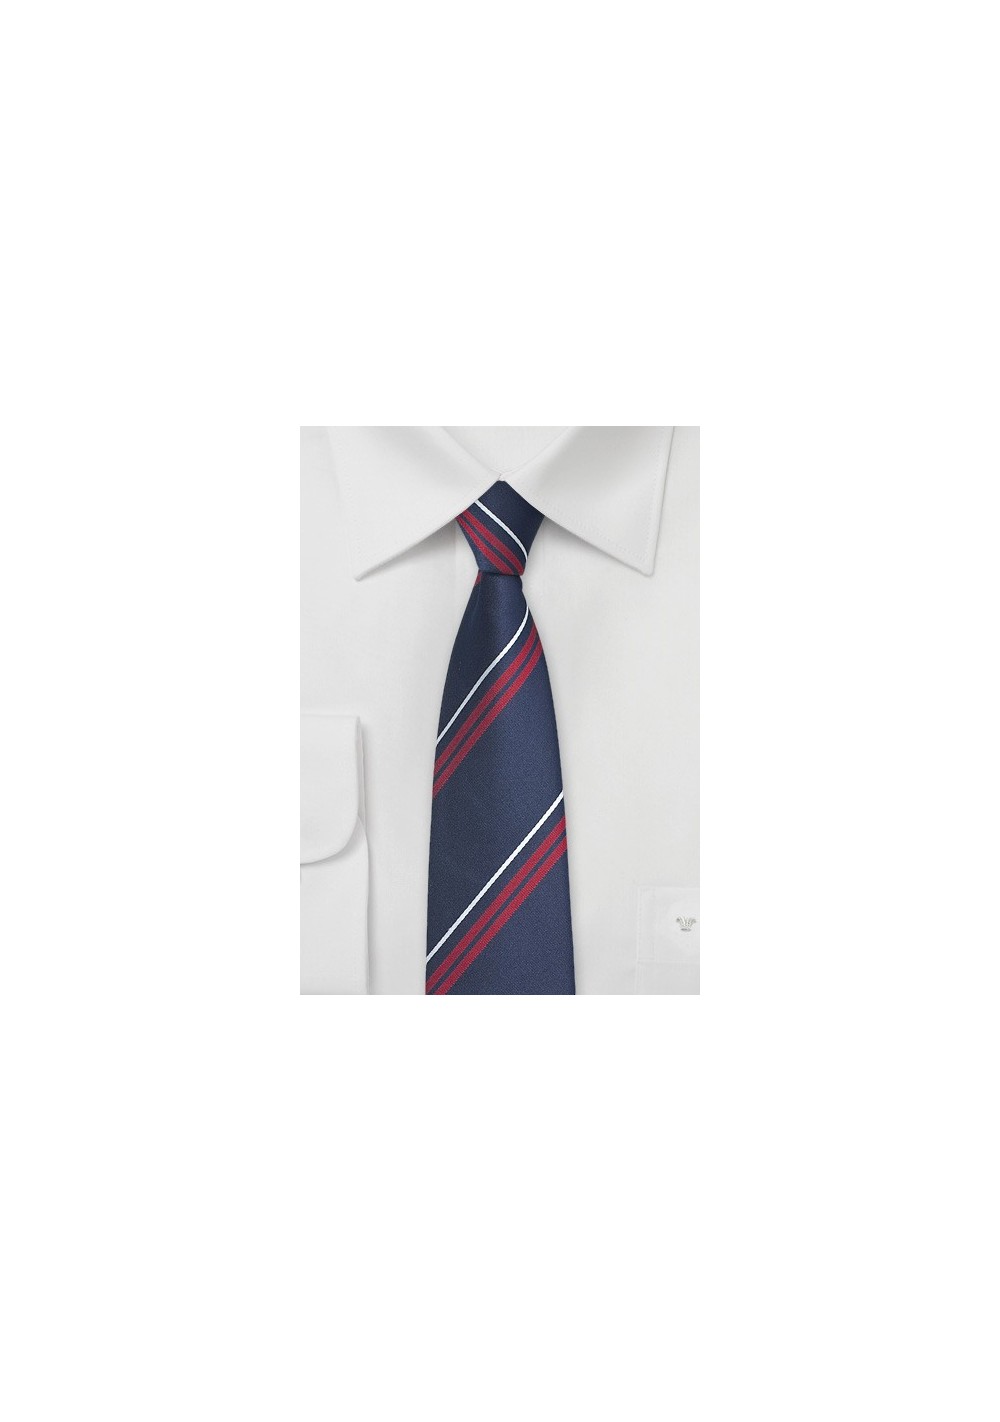 Fun Striped Tie in Blue and Cherry Red